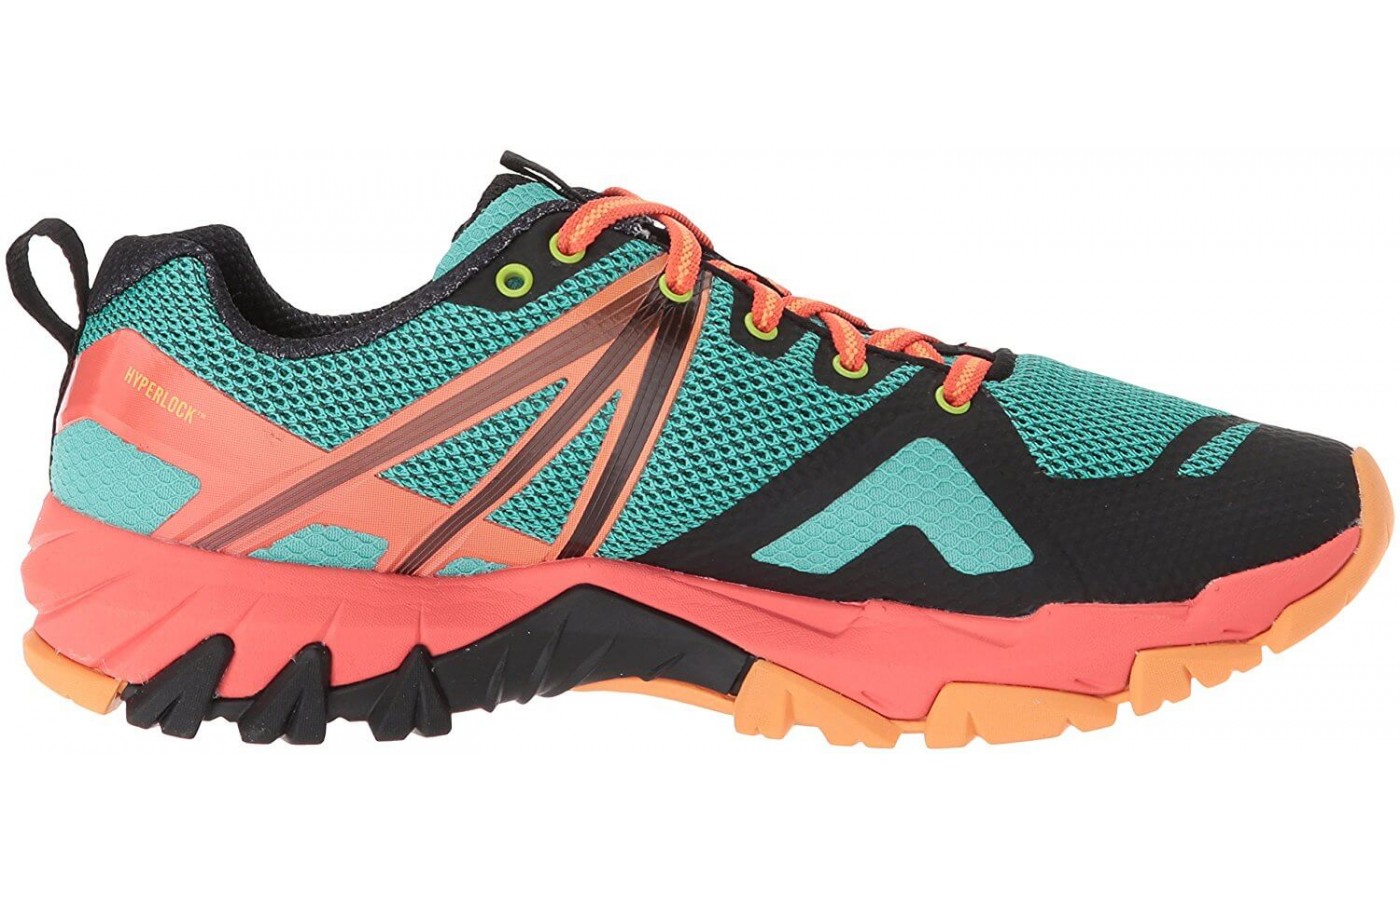 The Merrell MQM Flex features their patented Flex Connect midsole